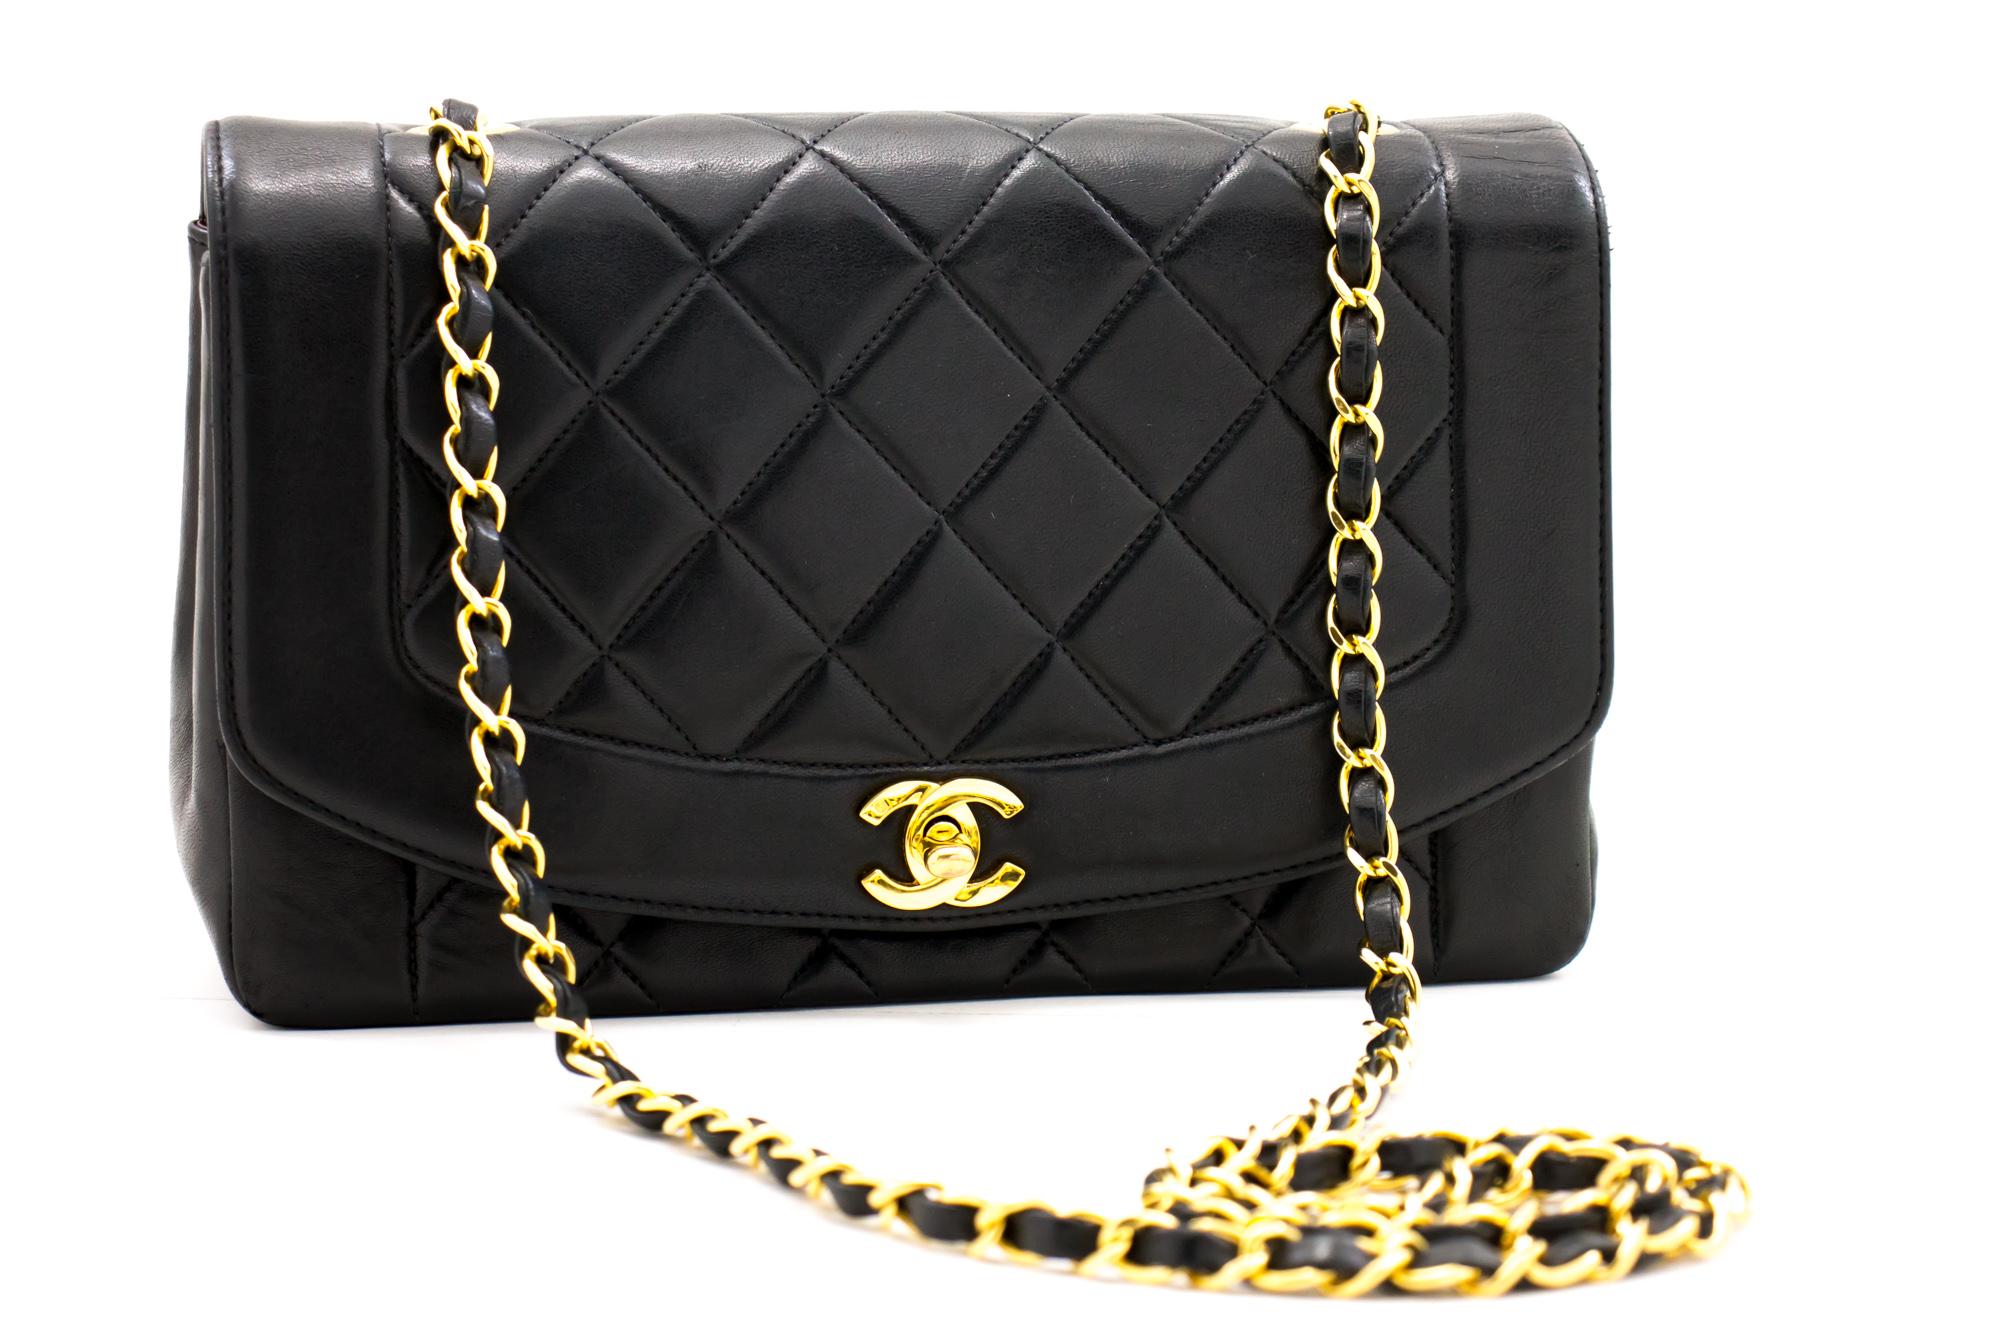 An authentic CHANEL Diana Flap Chain Shoulder Bag Crossbody Black Quilted Lamb. The color is Black. The outside material is Leather. The pattern is Solid. This item is Vintage / Classic. The year of manufacture would be 1994-1996.
Conditions &